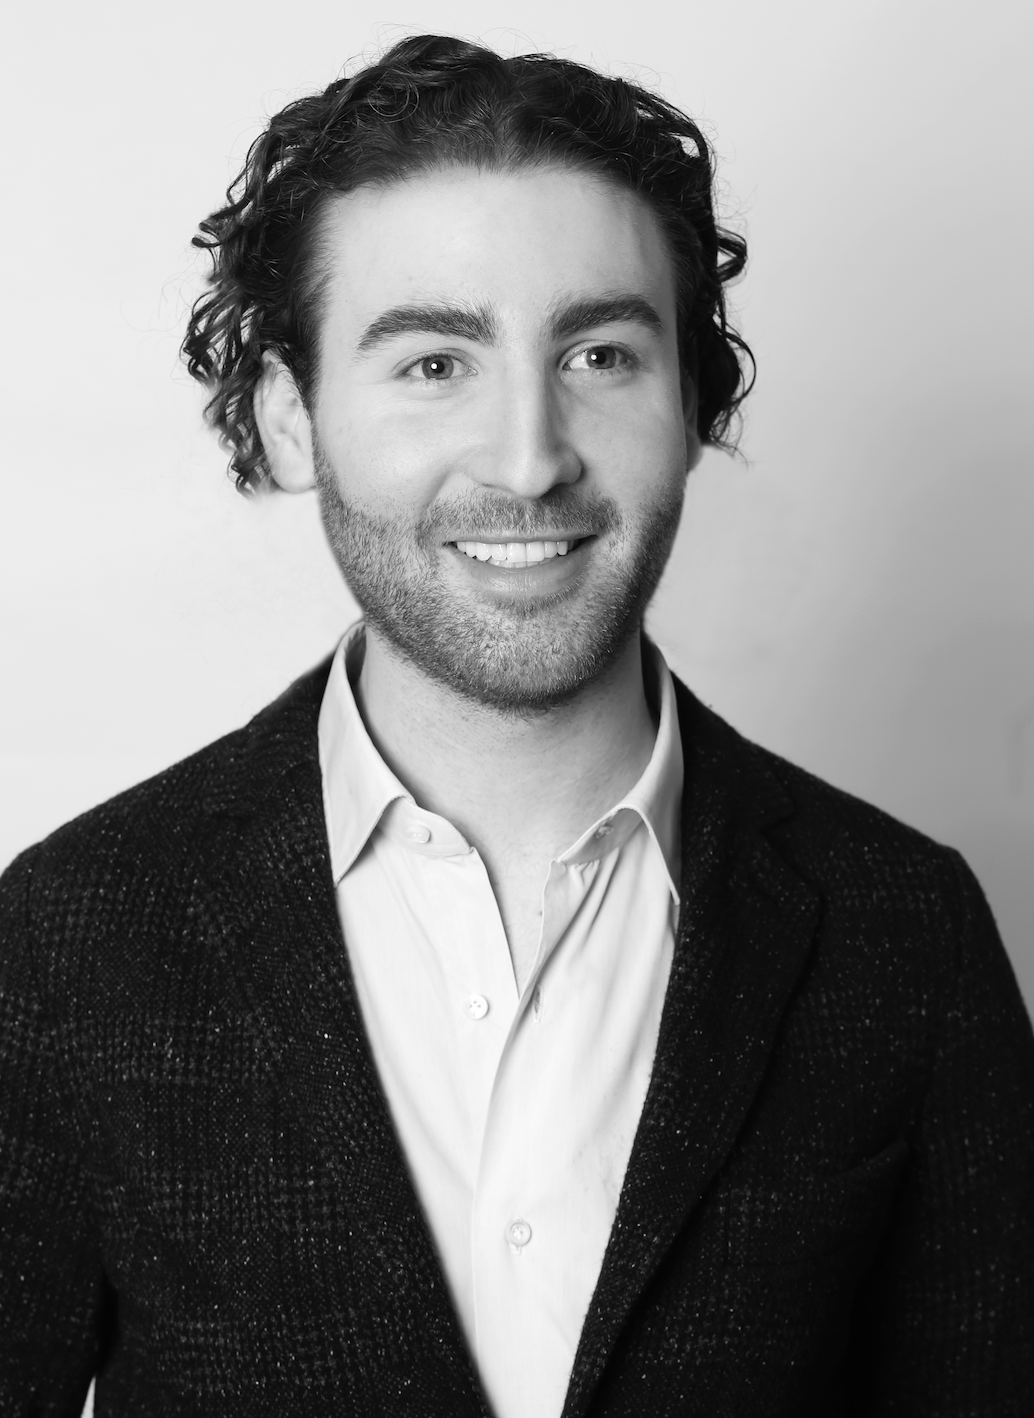 <p>Matthew Watts is an assistant curator at Tate and has most recently curated the Turner Prize 2022. Working in the International Partnerships programme, he has co-curated a range of exhibitions including <em>Light from Tate: 1700s to Now</em>, <em>Millais&rsquo; Ophelia</em> and <em>The Dynamic Eye</em>.  Matthew previously worked at the National Portrait Gallery, London; the Peggy Guggenheim Collection, Venice; and was a board member of the Art Association of Australia and New Zealand Executive Committee. &nbsp;</p>